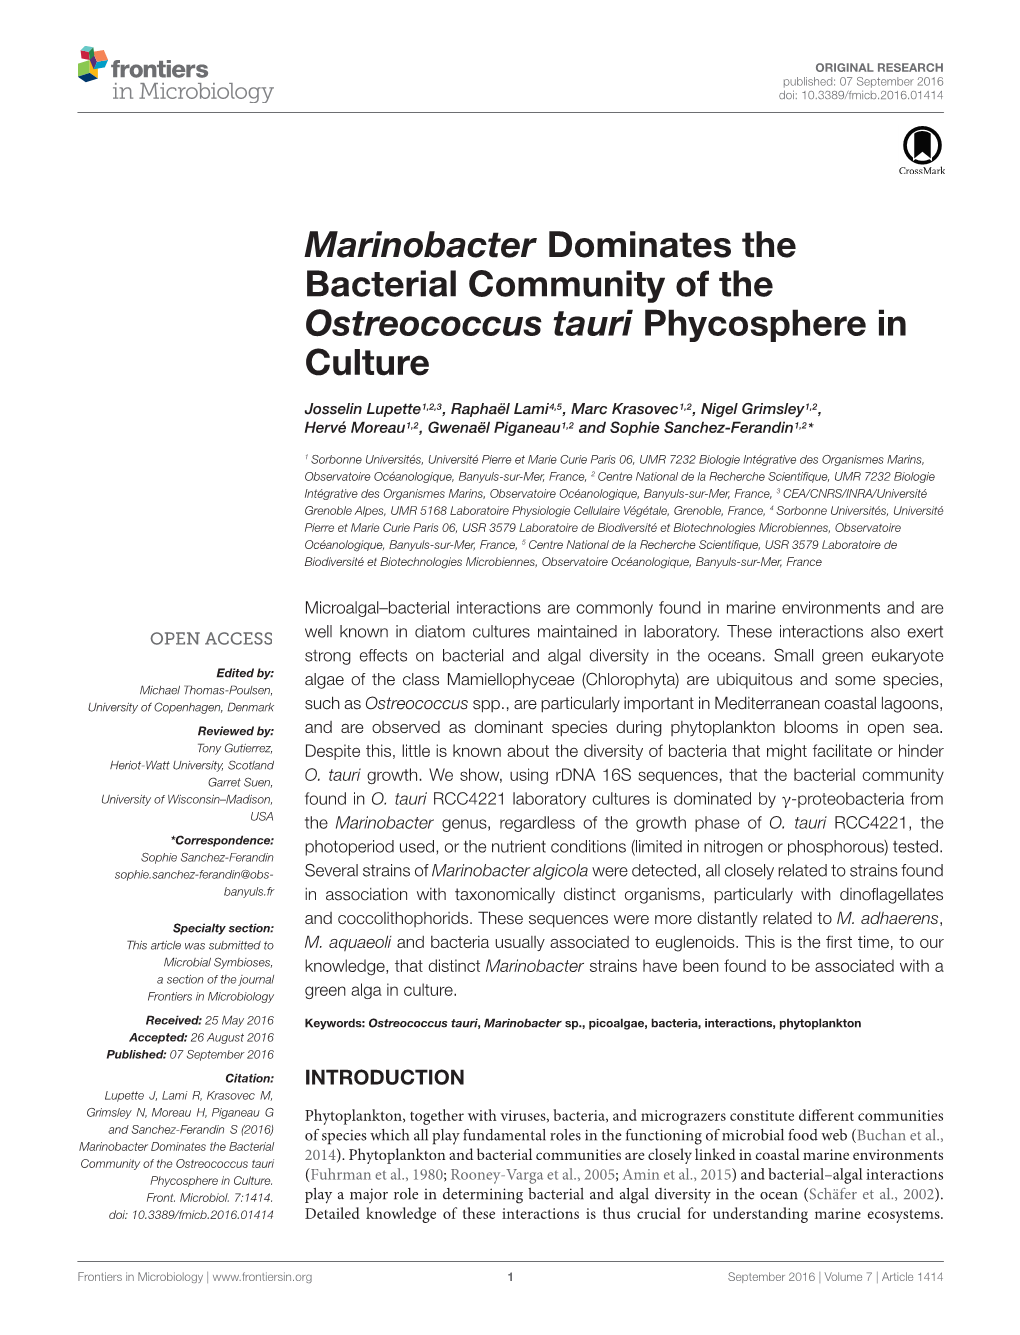 Marinobacter Dominates the Bacterial Community of the Ostreococcus Tauri Phycosphere in Culture